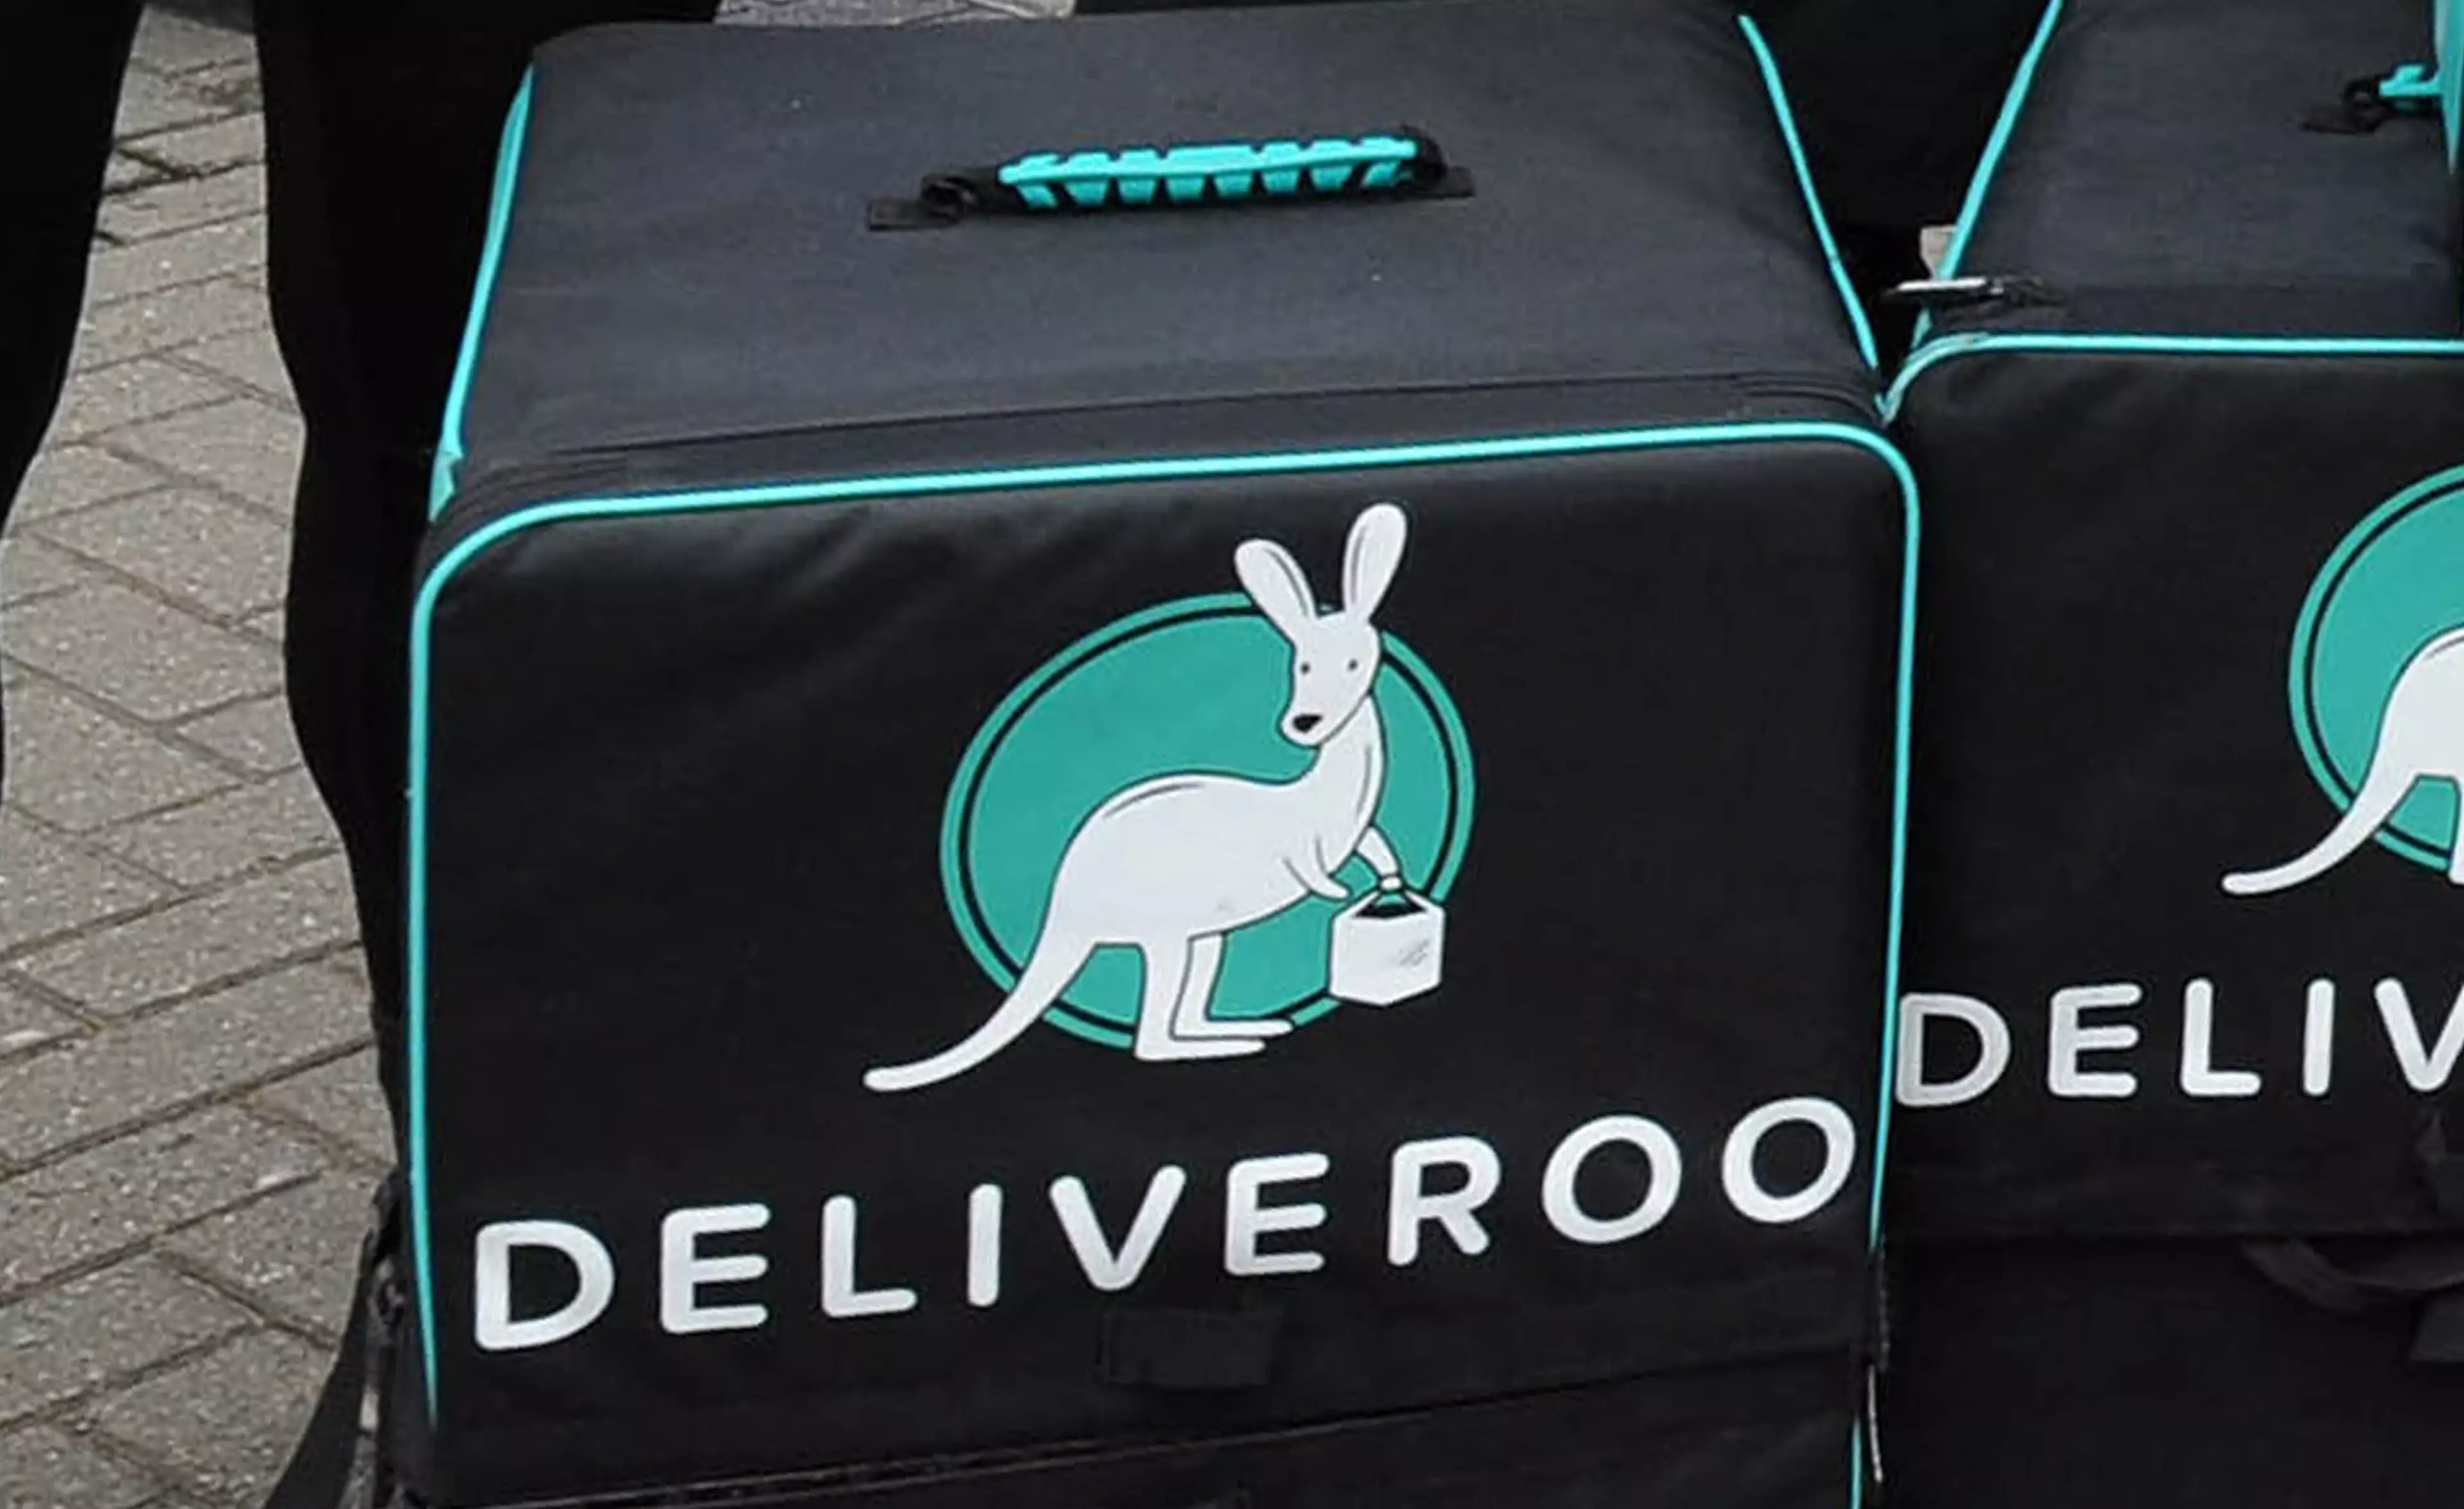 Deliveroo is handing out free ice creams in London today.